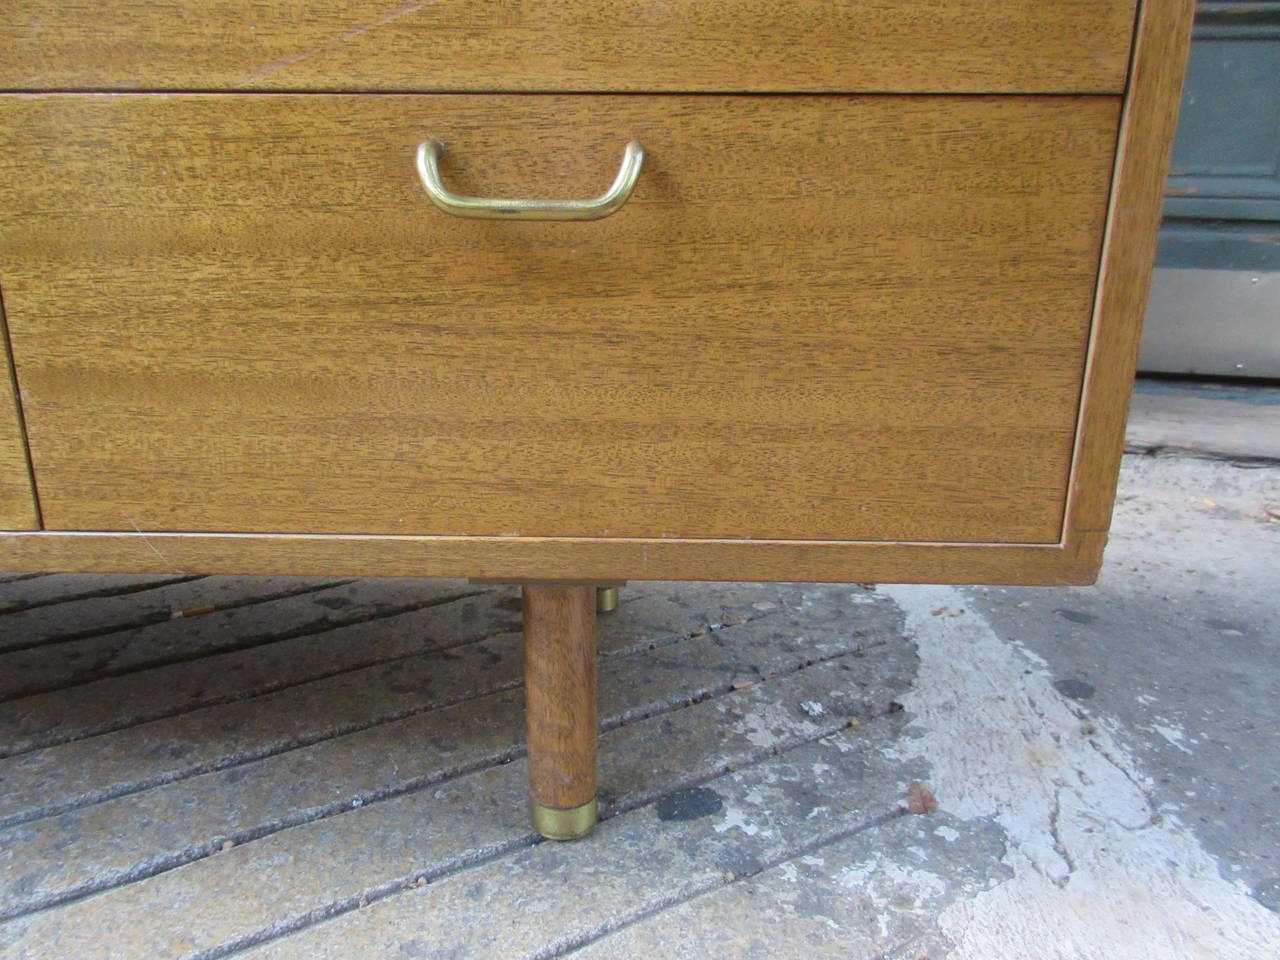 Bleached mahogany dresser with brass accents and capped legs. Retains original label and completely original finish.